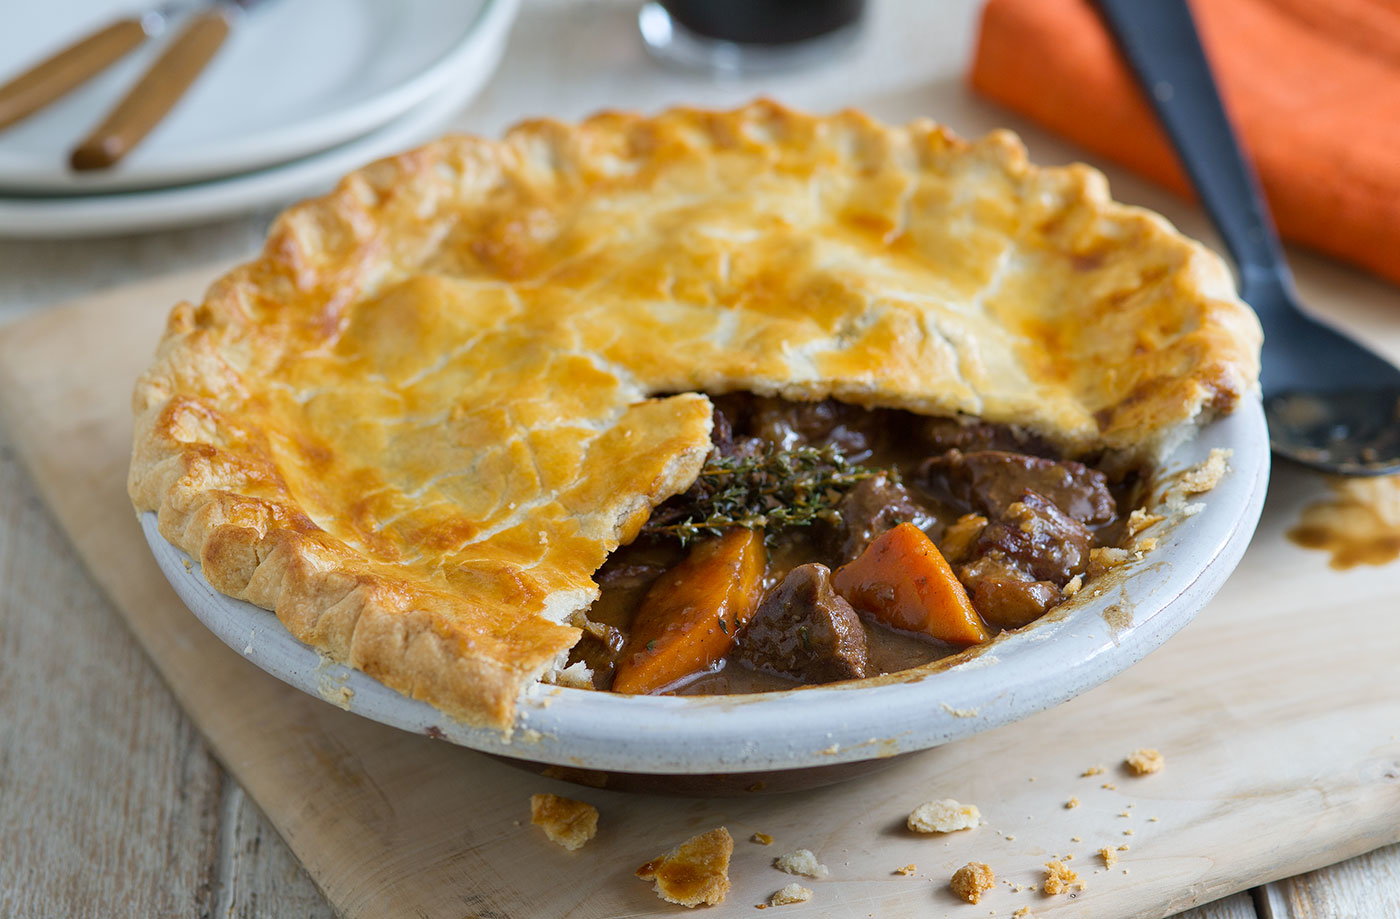 Steak and guinness pie